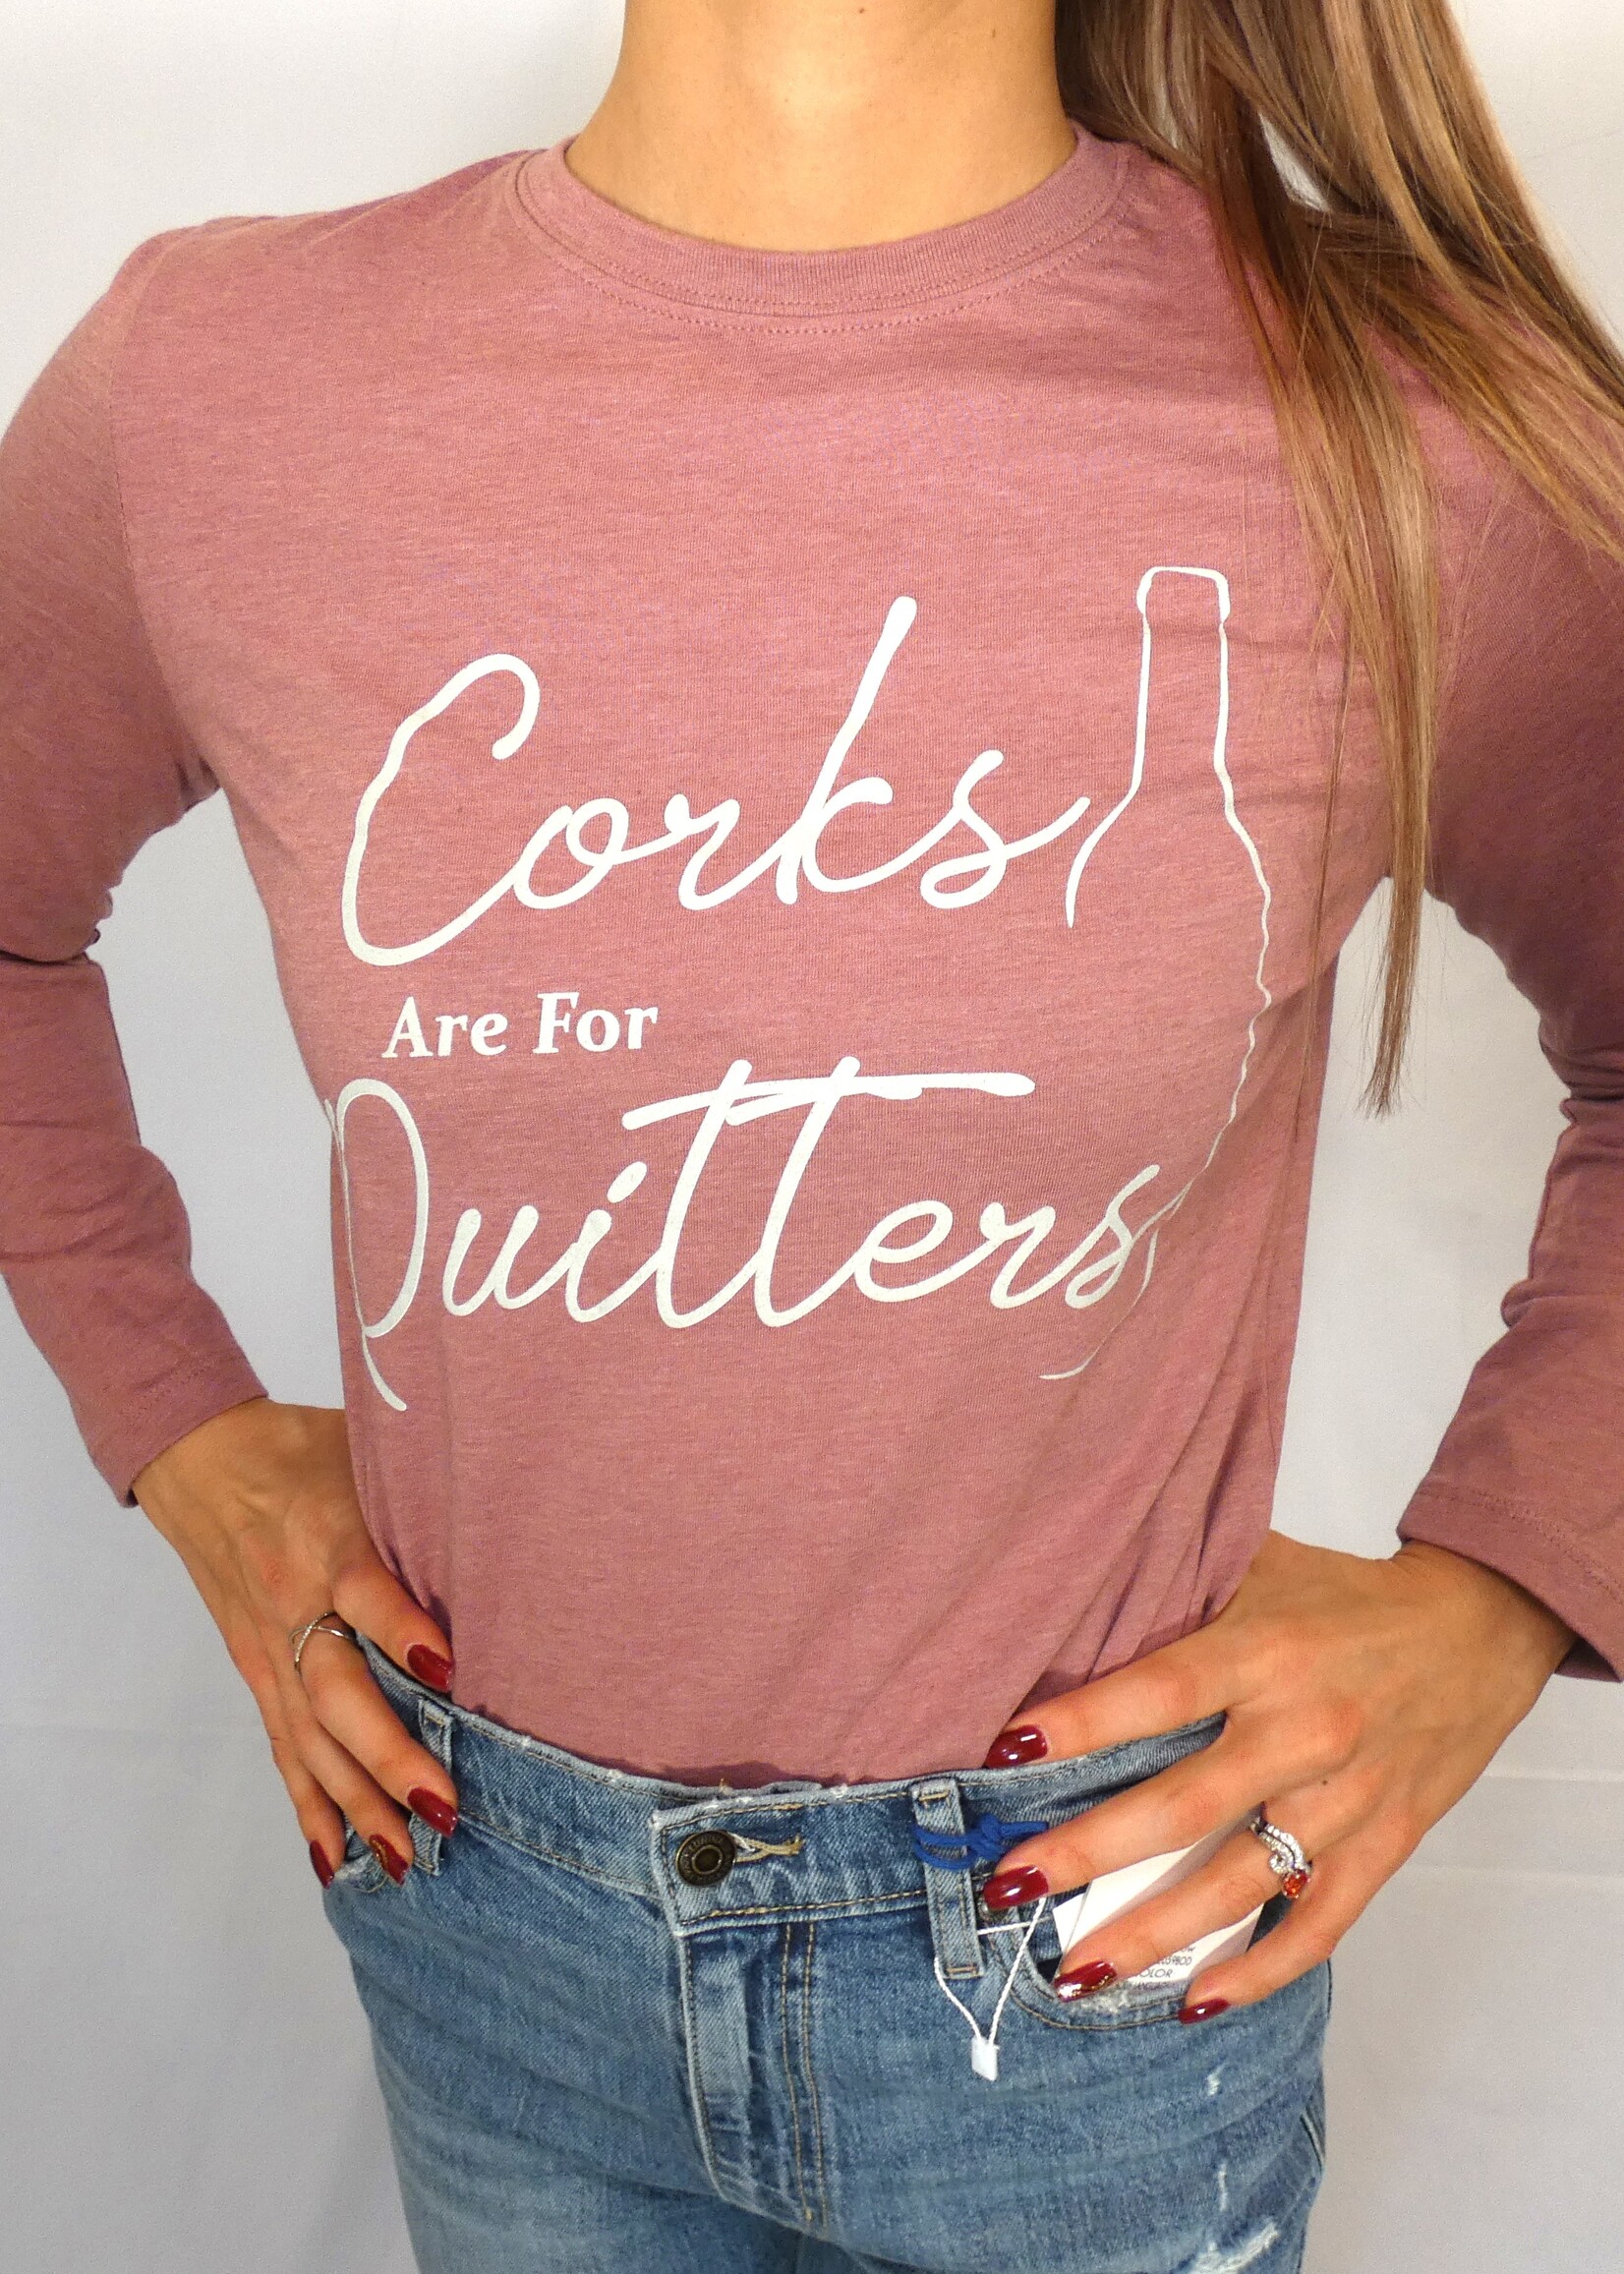 Corks Are For Quitters Long Sleeve - Mauve